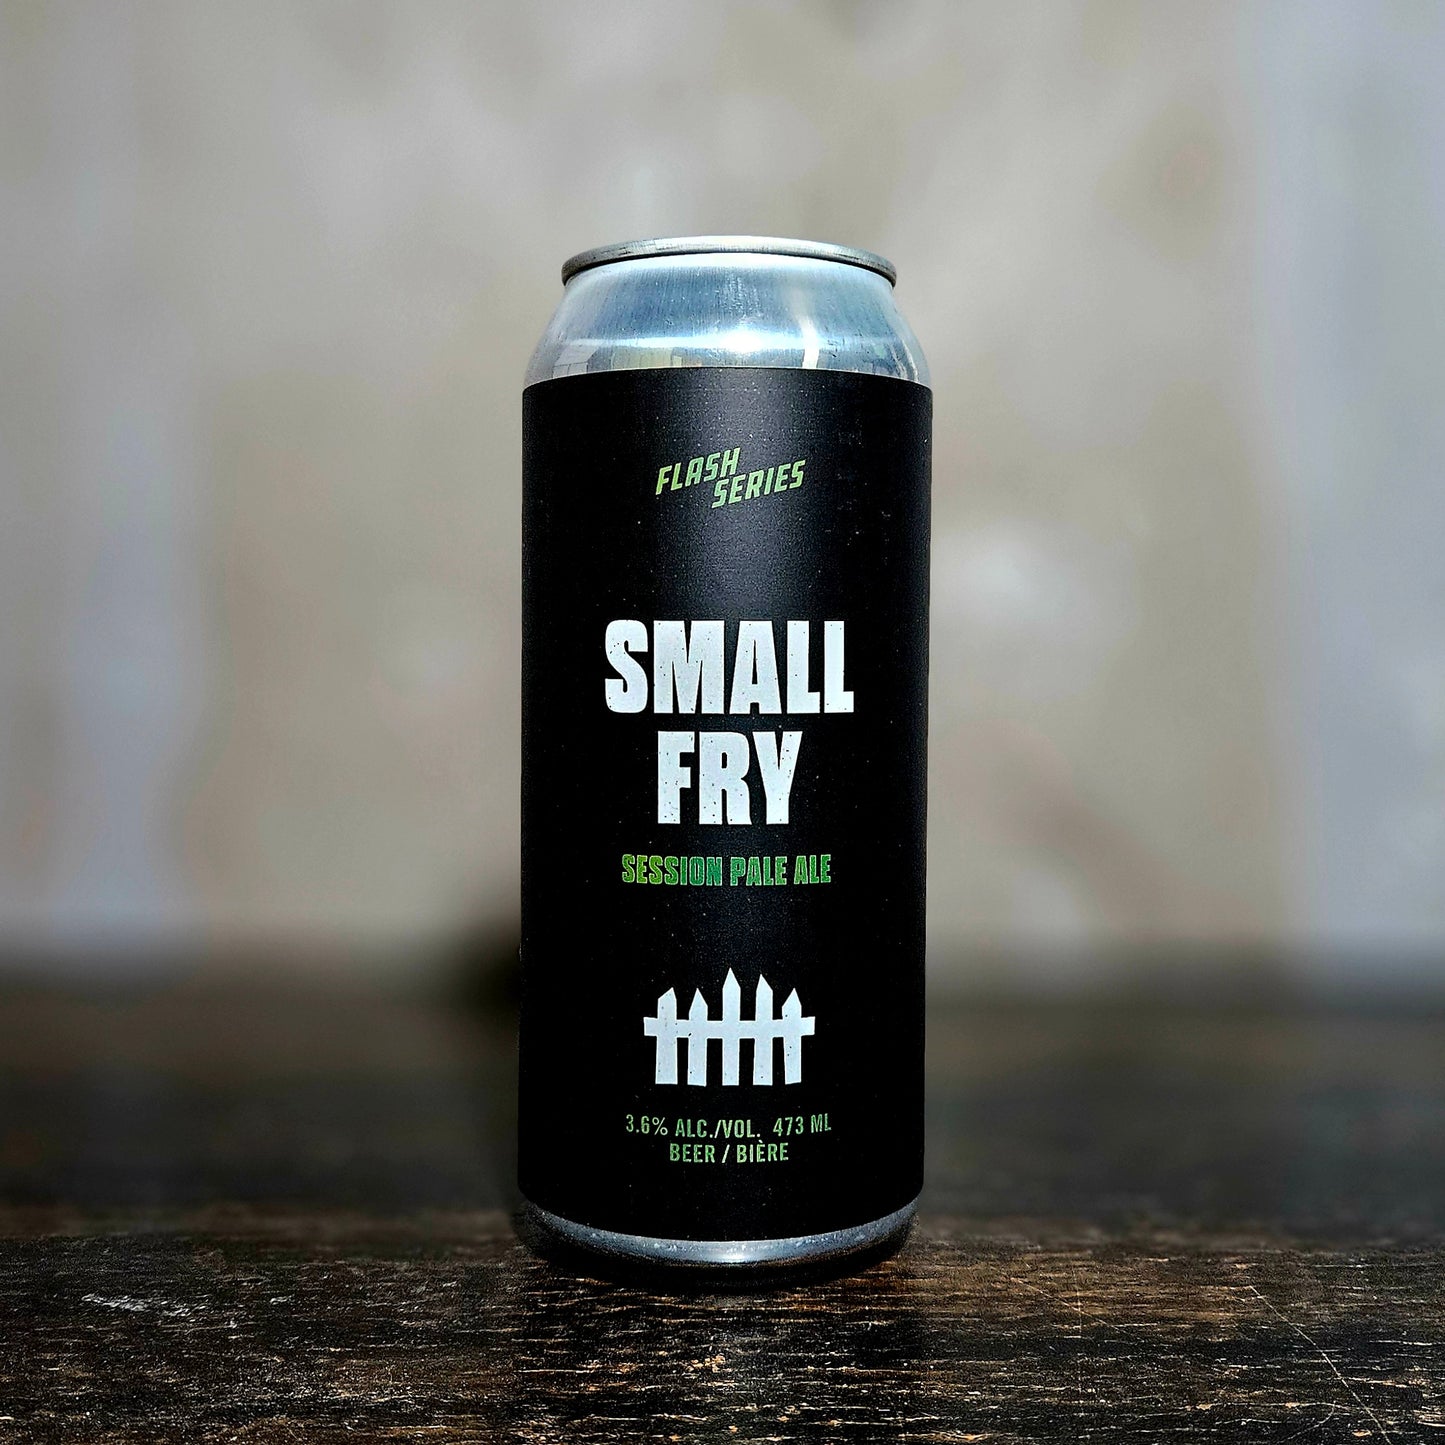 Beyond The Pale "Small Fry" Session Pale Ale